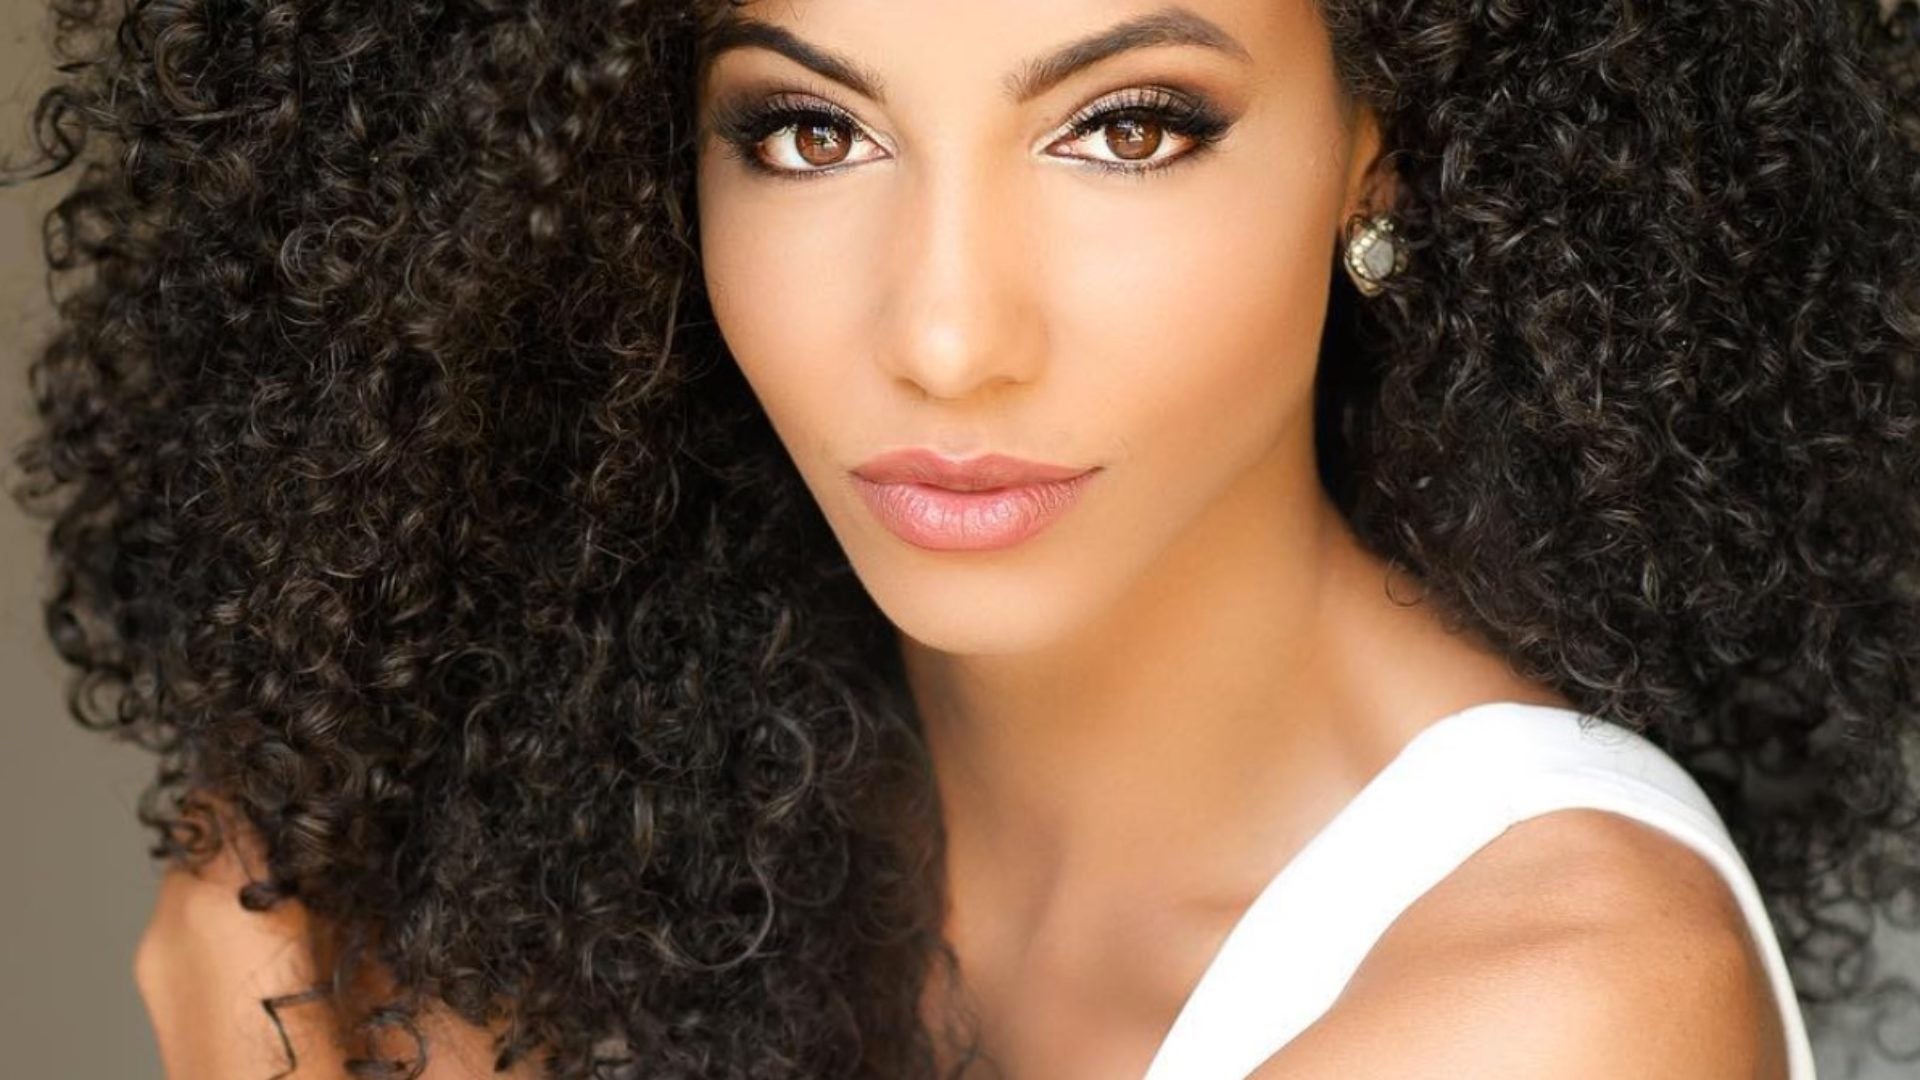 5 Fast Facts About Our New Beauty Queen Miss USA Cheslie Kryst